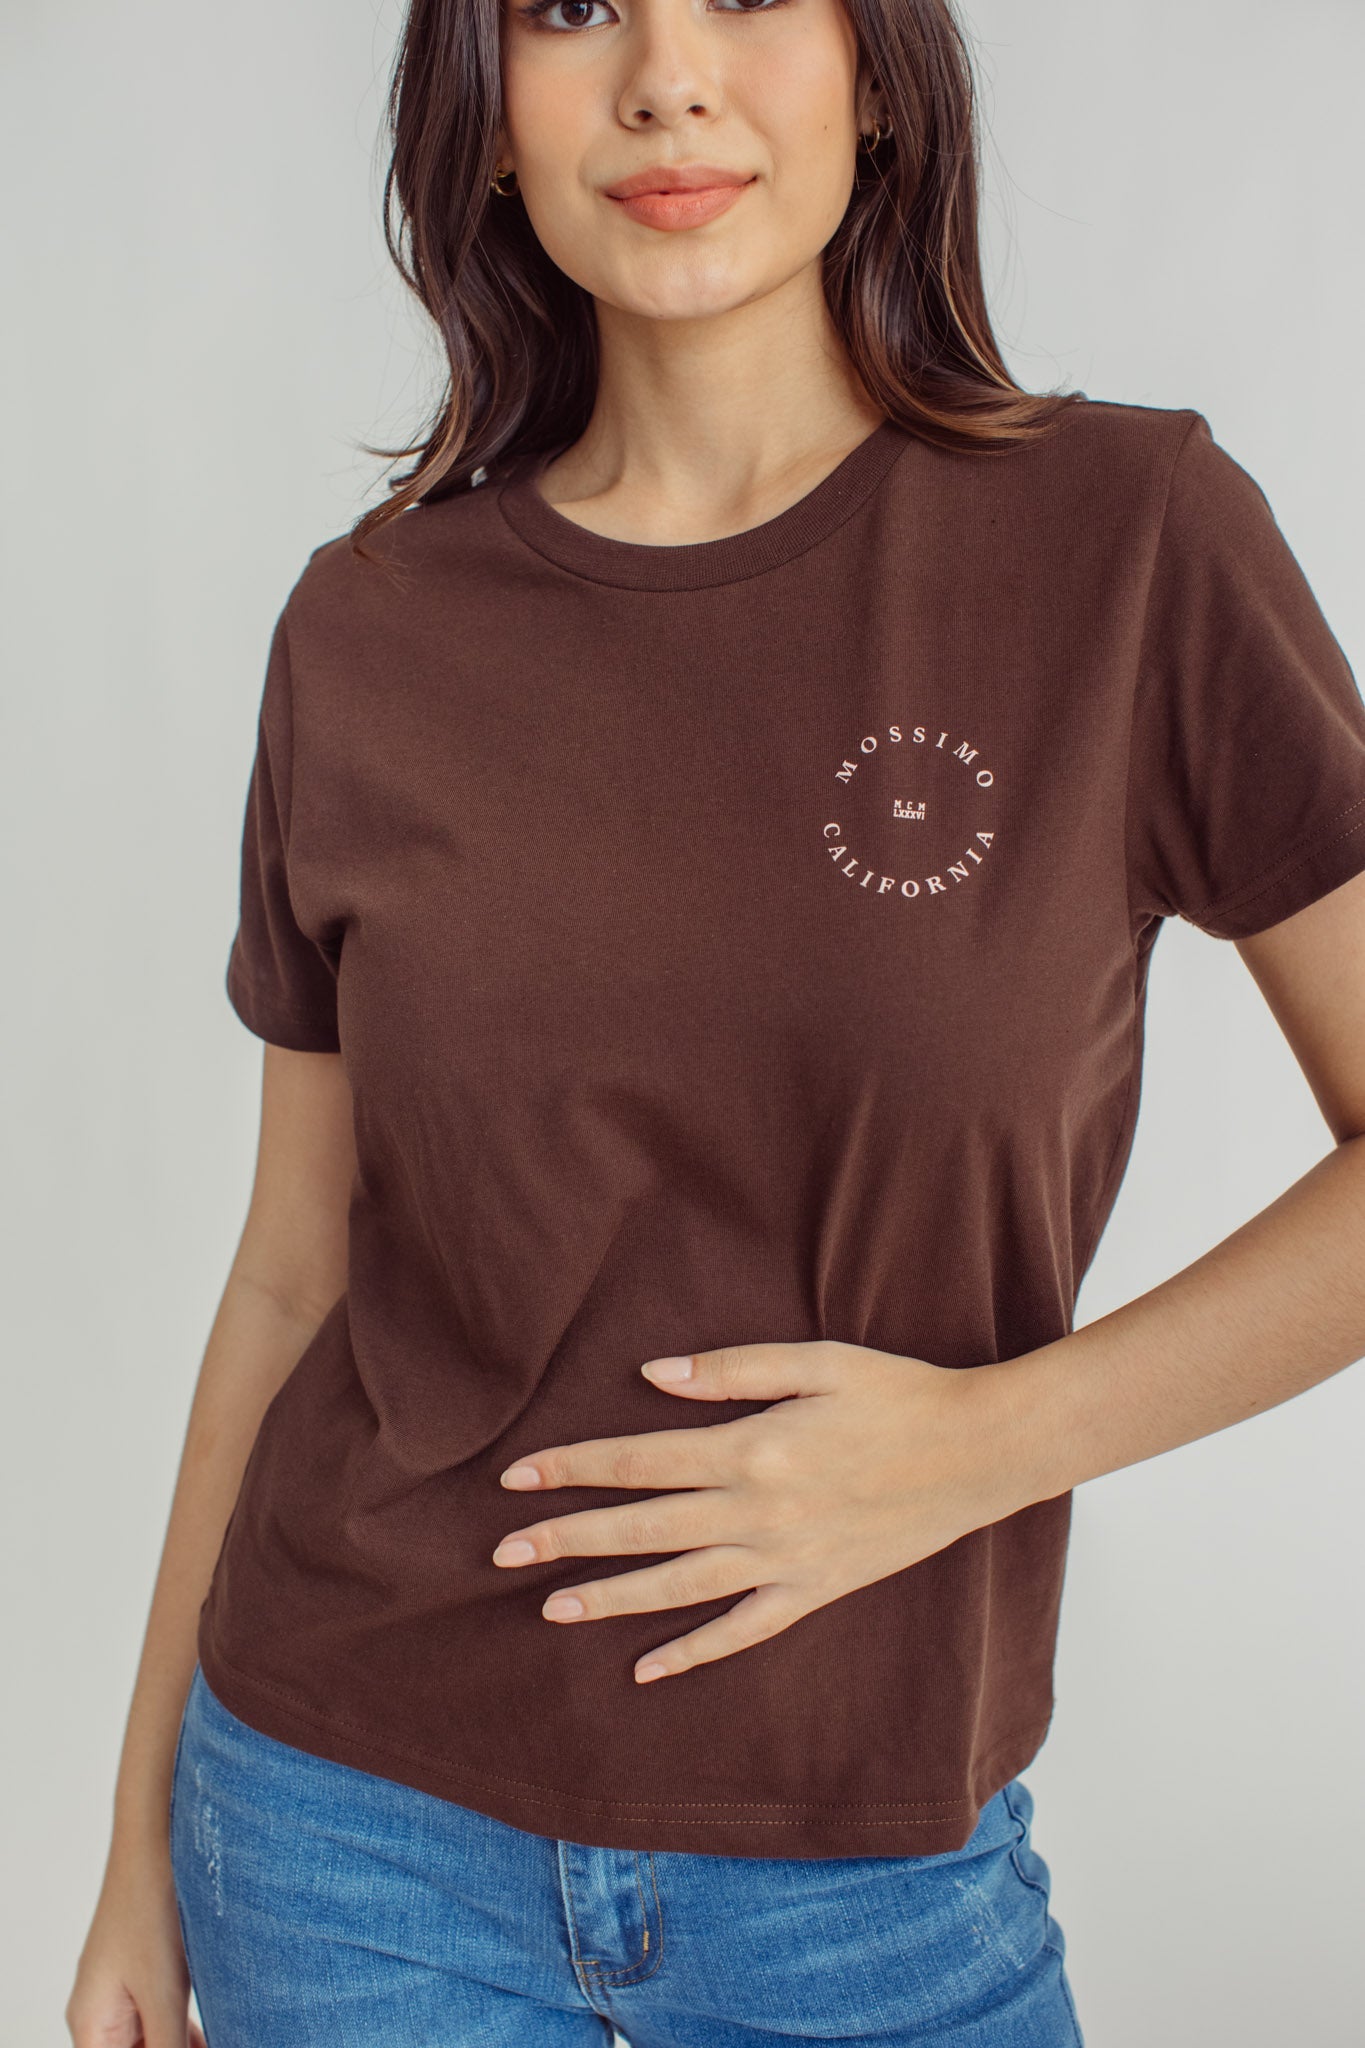 Choco Brown with Mossimo California High Density Classic Fit Tee - Mossimo PH